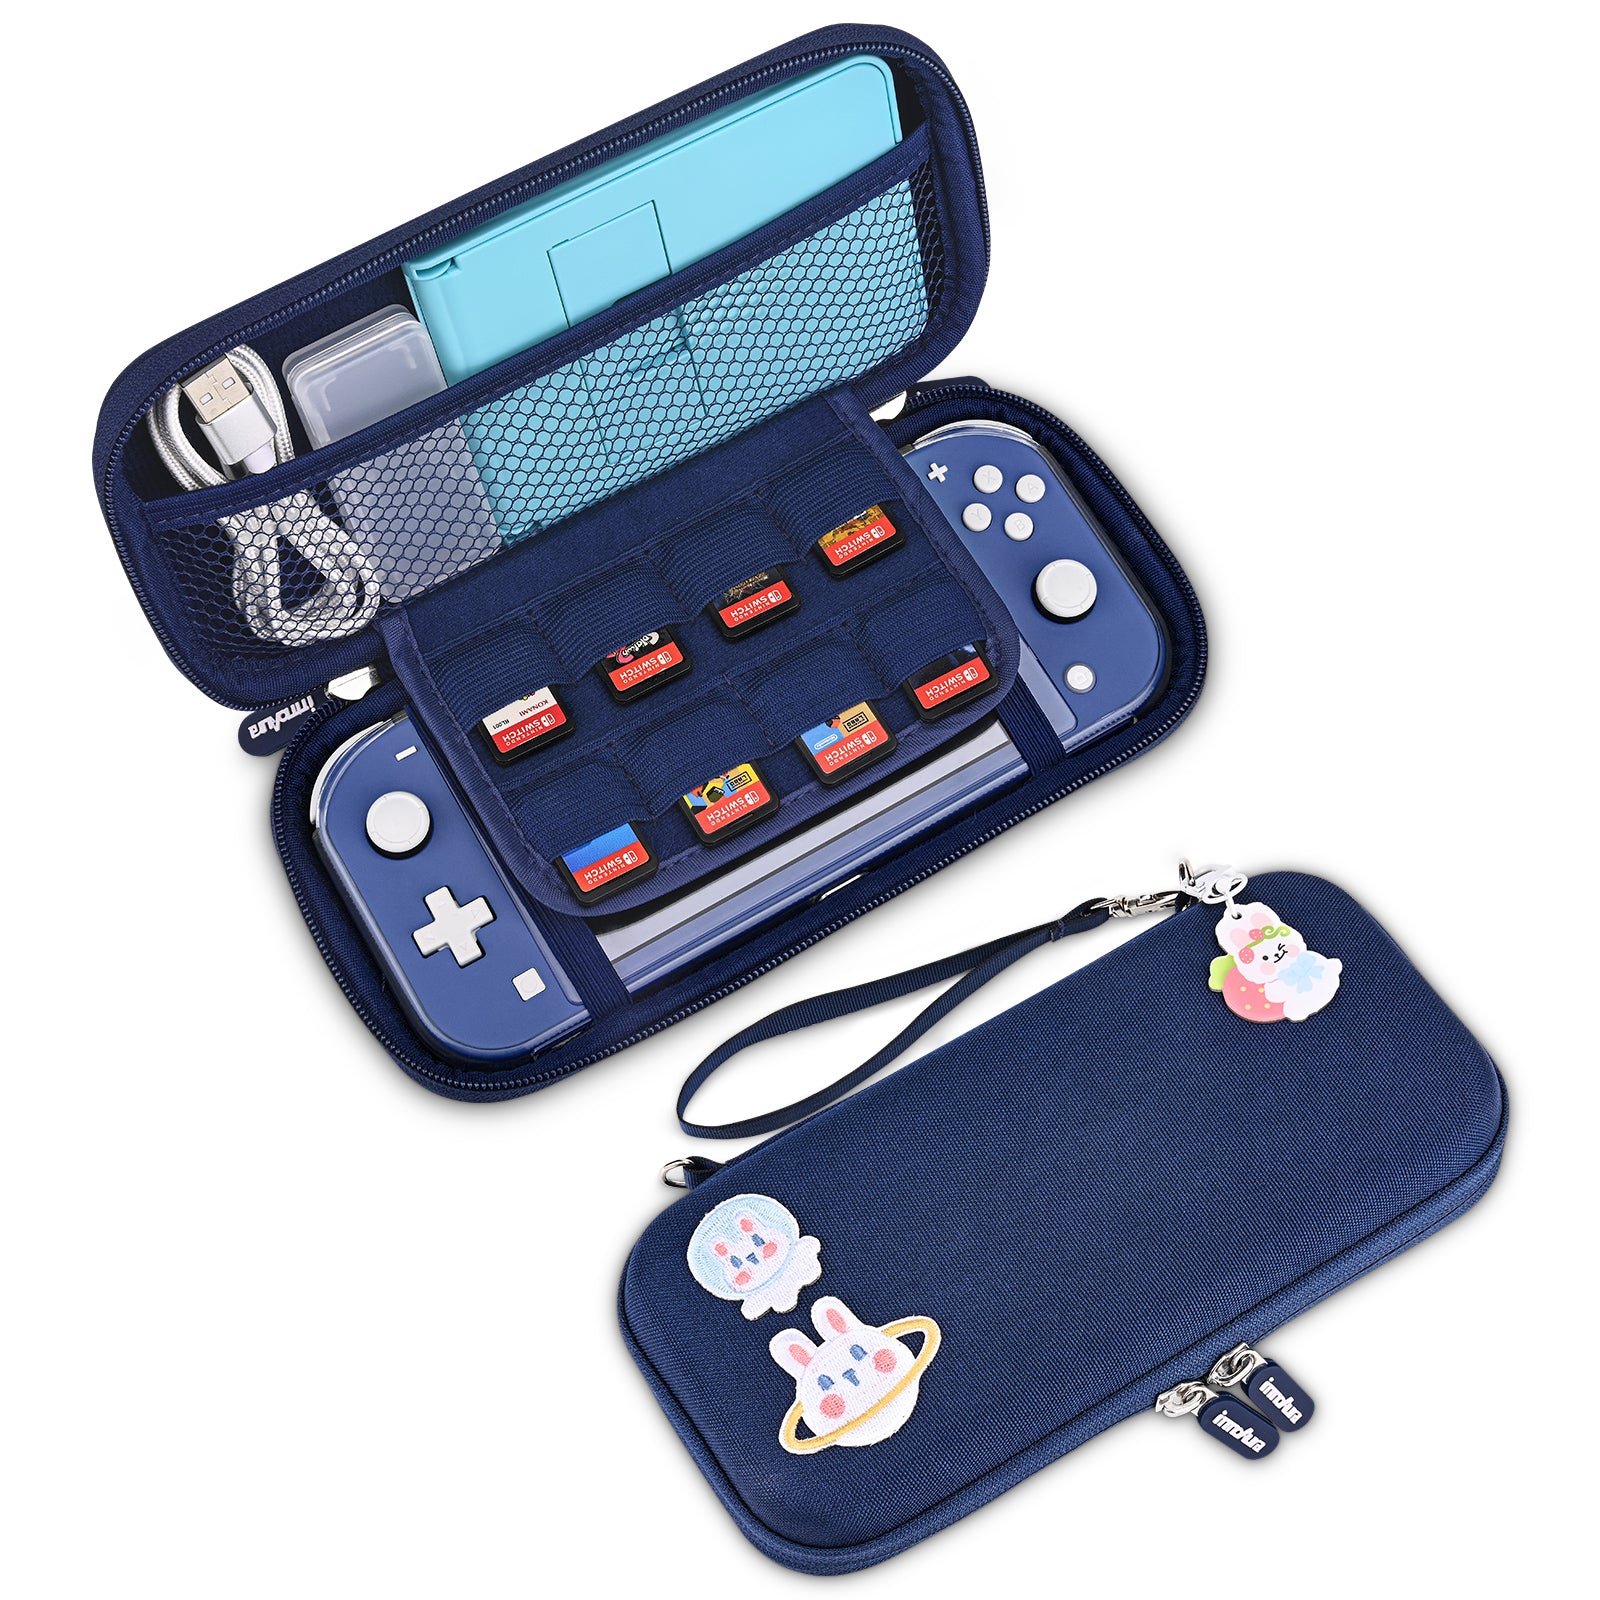 innoAura Nintendo Siwtch Lite Carrying Case with 17 Accessories, Lite Thumb Grips